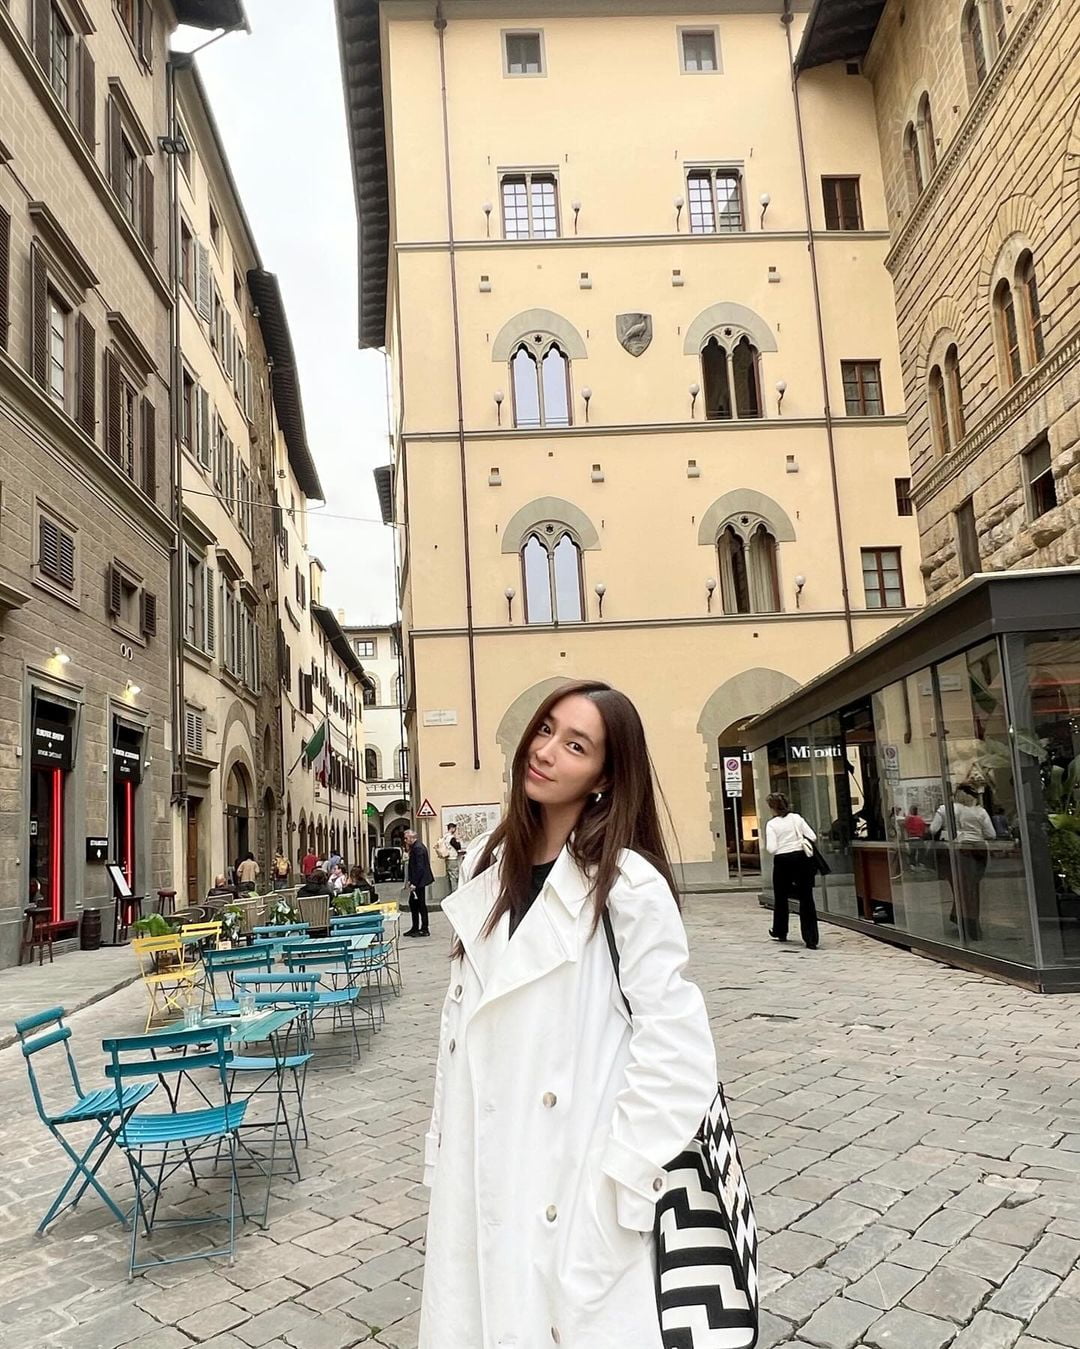 Lee Min-jung, did she go on a trip to Italy with her husband Lee Byung-hun? “You look nice for the first time in a long time.”